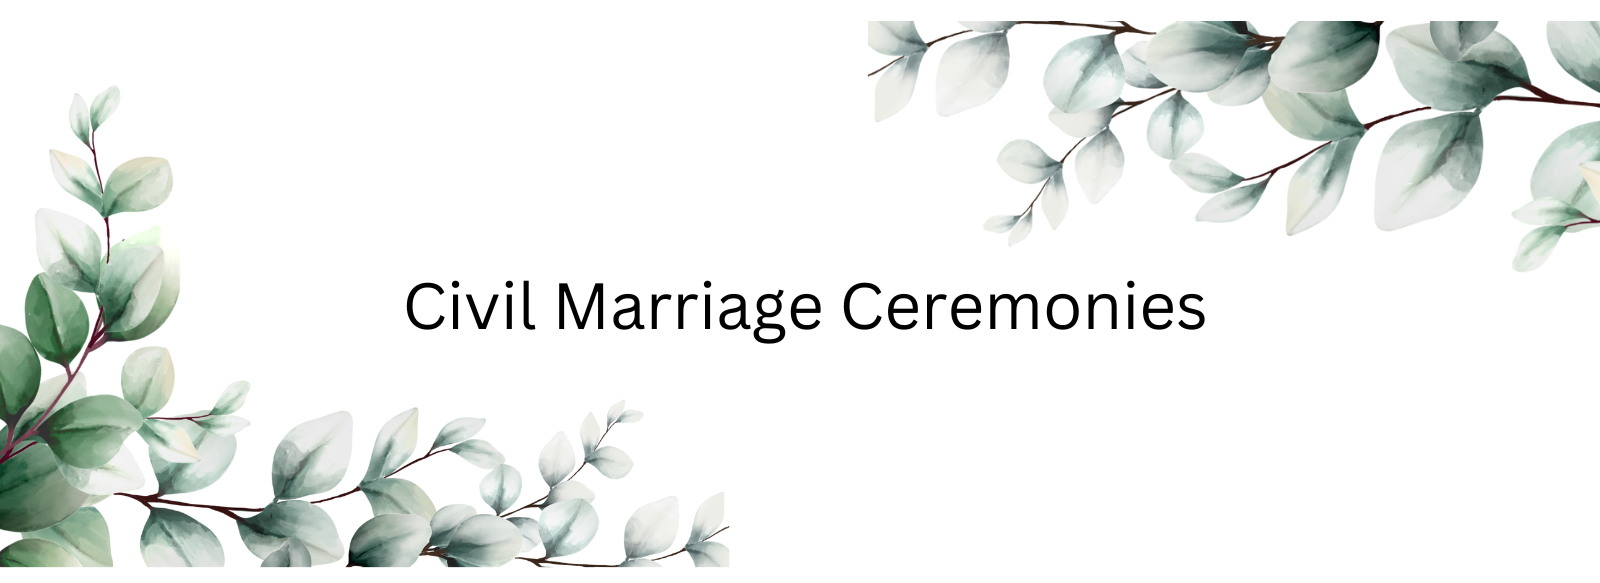 Civil Service Marriage Banner with green flowers 